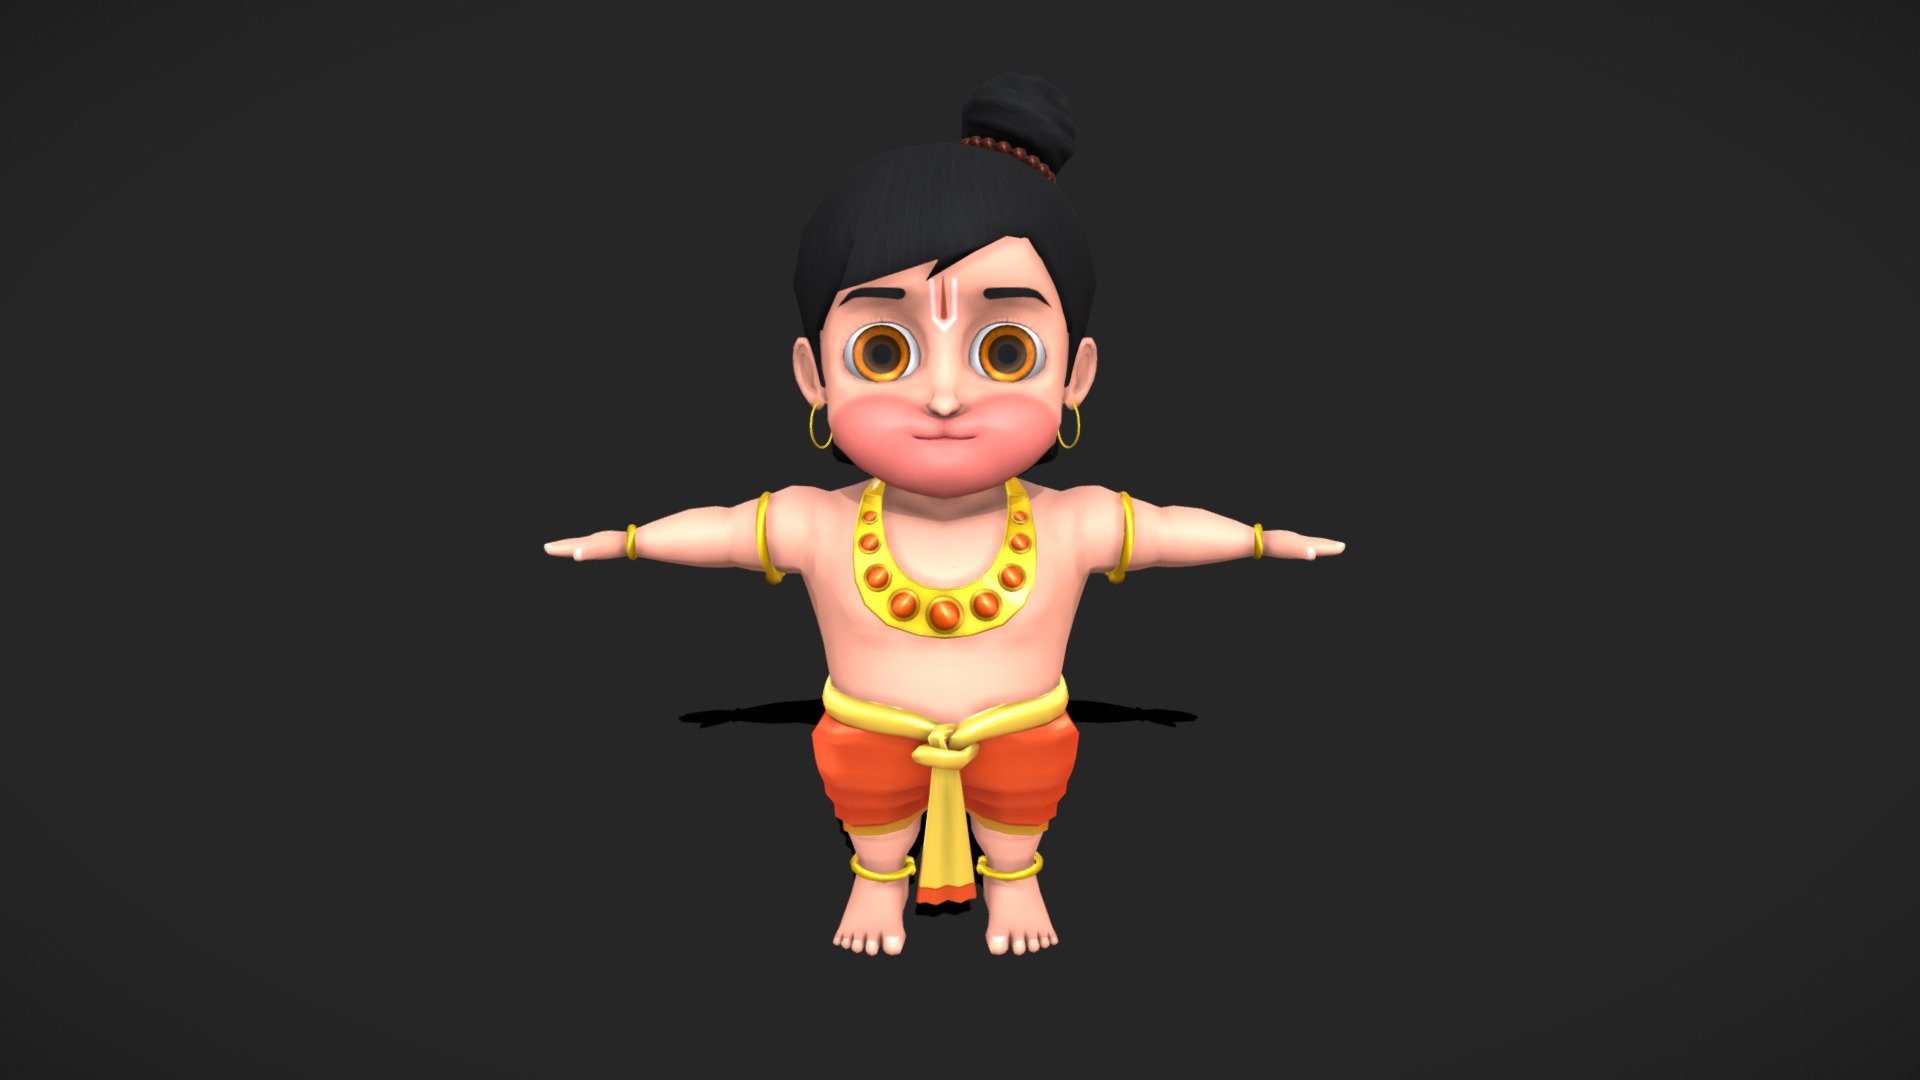 Game Ready, High-Quality Model of Chhota Hanuman.

Features :-





Completely Unwrapped Hanuman Character &amp; Mace




Rigged &amp; Mecanim ready.




Consists of High Quality and Detailed Textures.




All Materials Assigned Properly.




Prefabs ready to use for Games.



Pack Contains :-

MODELS :




Chhota Hanuman: Packed with  1 Amazing Game ready Bala Hanuman Model along with his weapon Mace.

TEXTURES :




All Textures with 2048 X 2048 Resolution.

TRI COUNT :

Hanuman: 15054, Mace: 1580

✔️ Character can be Rigged &amp; Animated using Mixamo.

We would love to hear your rating and comments.

Support email: tgamesassets@gmail.com - Chhota Hanuman / Bal Hanuman - Buy Royalty Free 3D model by TGamesAssets 3d model